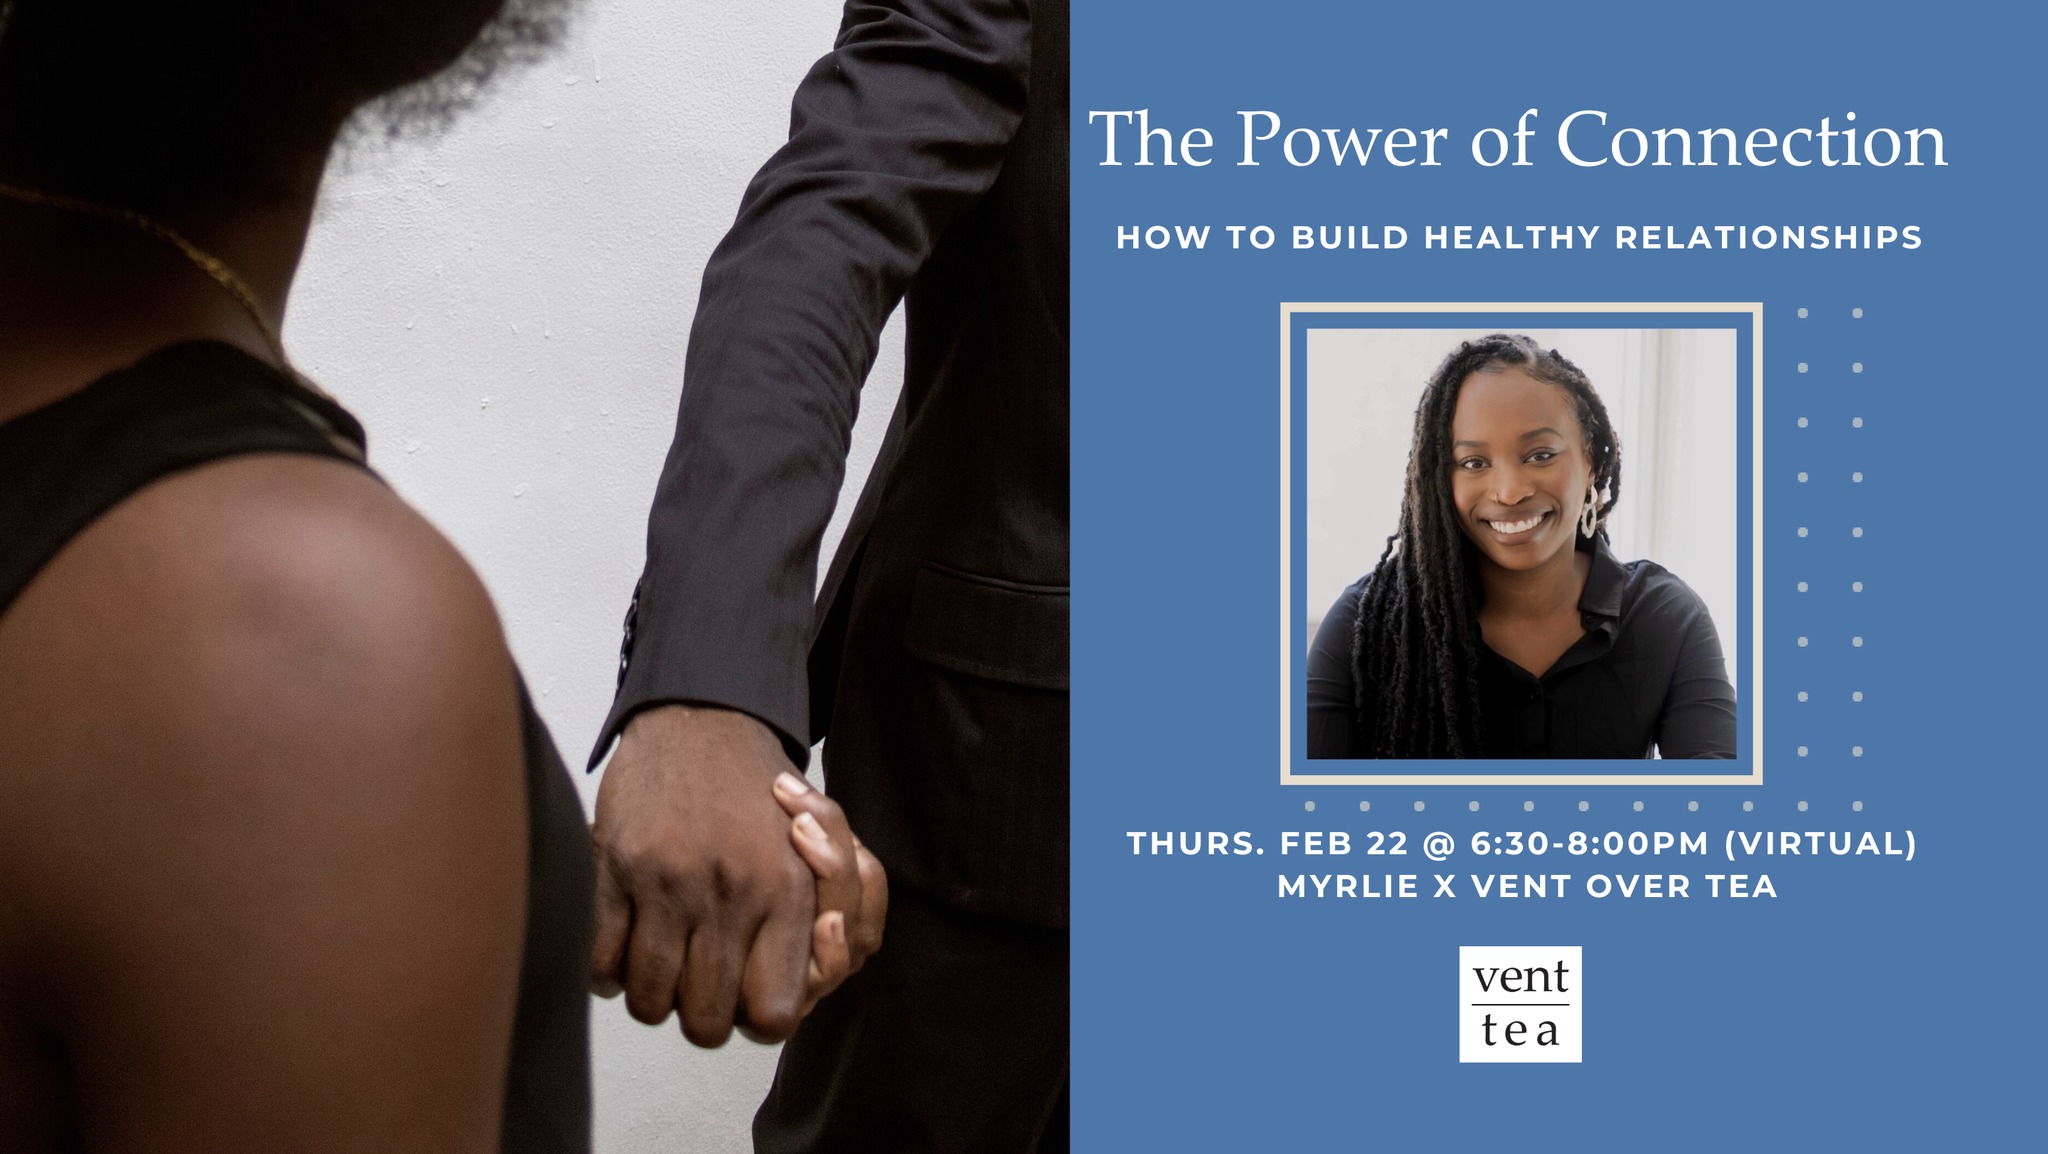 The Power of Connection: How to Build Healthy Relationships